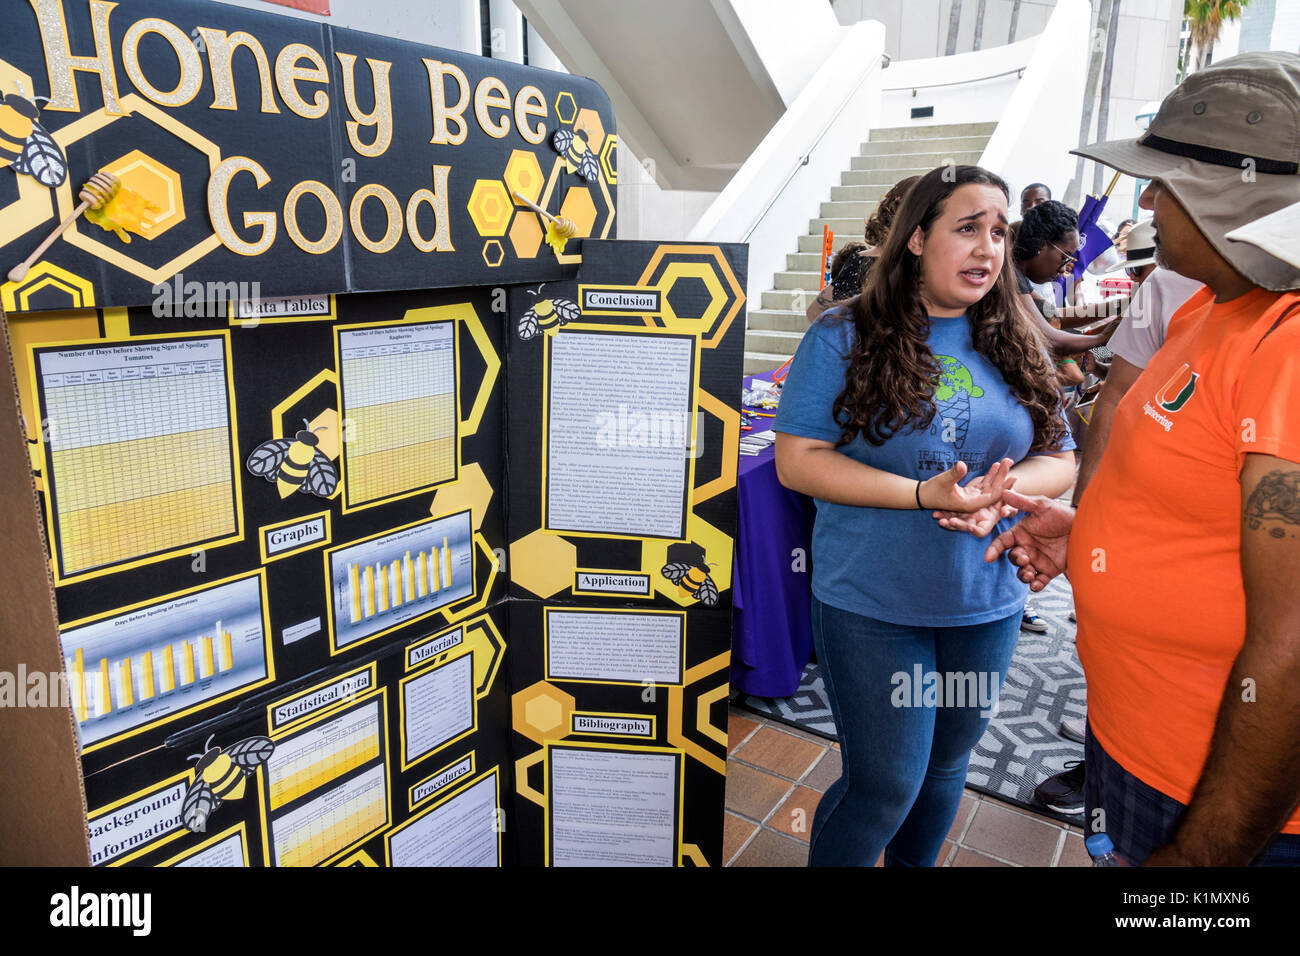 Miami Florida,Downtown,Government Center,March for Science,protest,rally,science expo,honey bees,student students pupil explains,FL170430168 Stock Photo